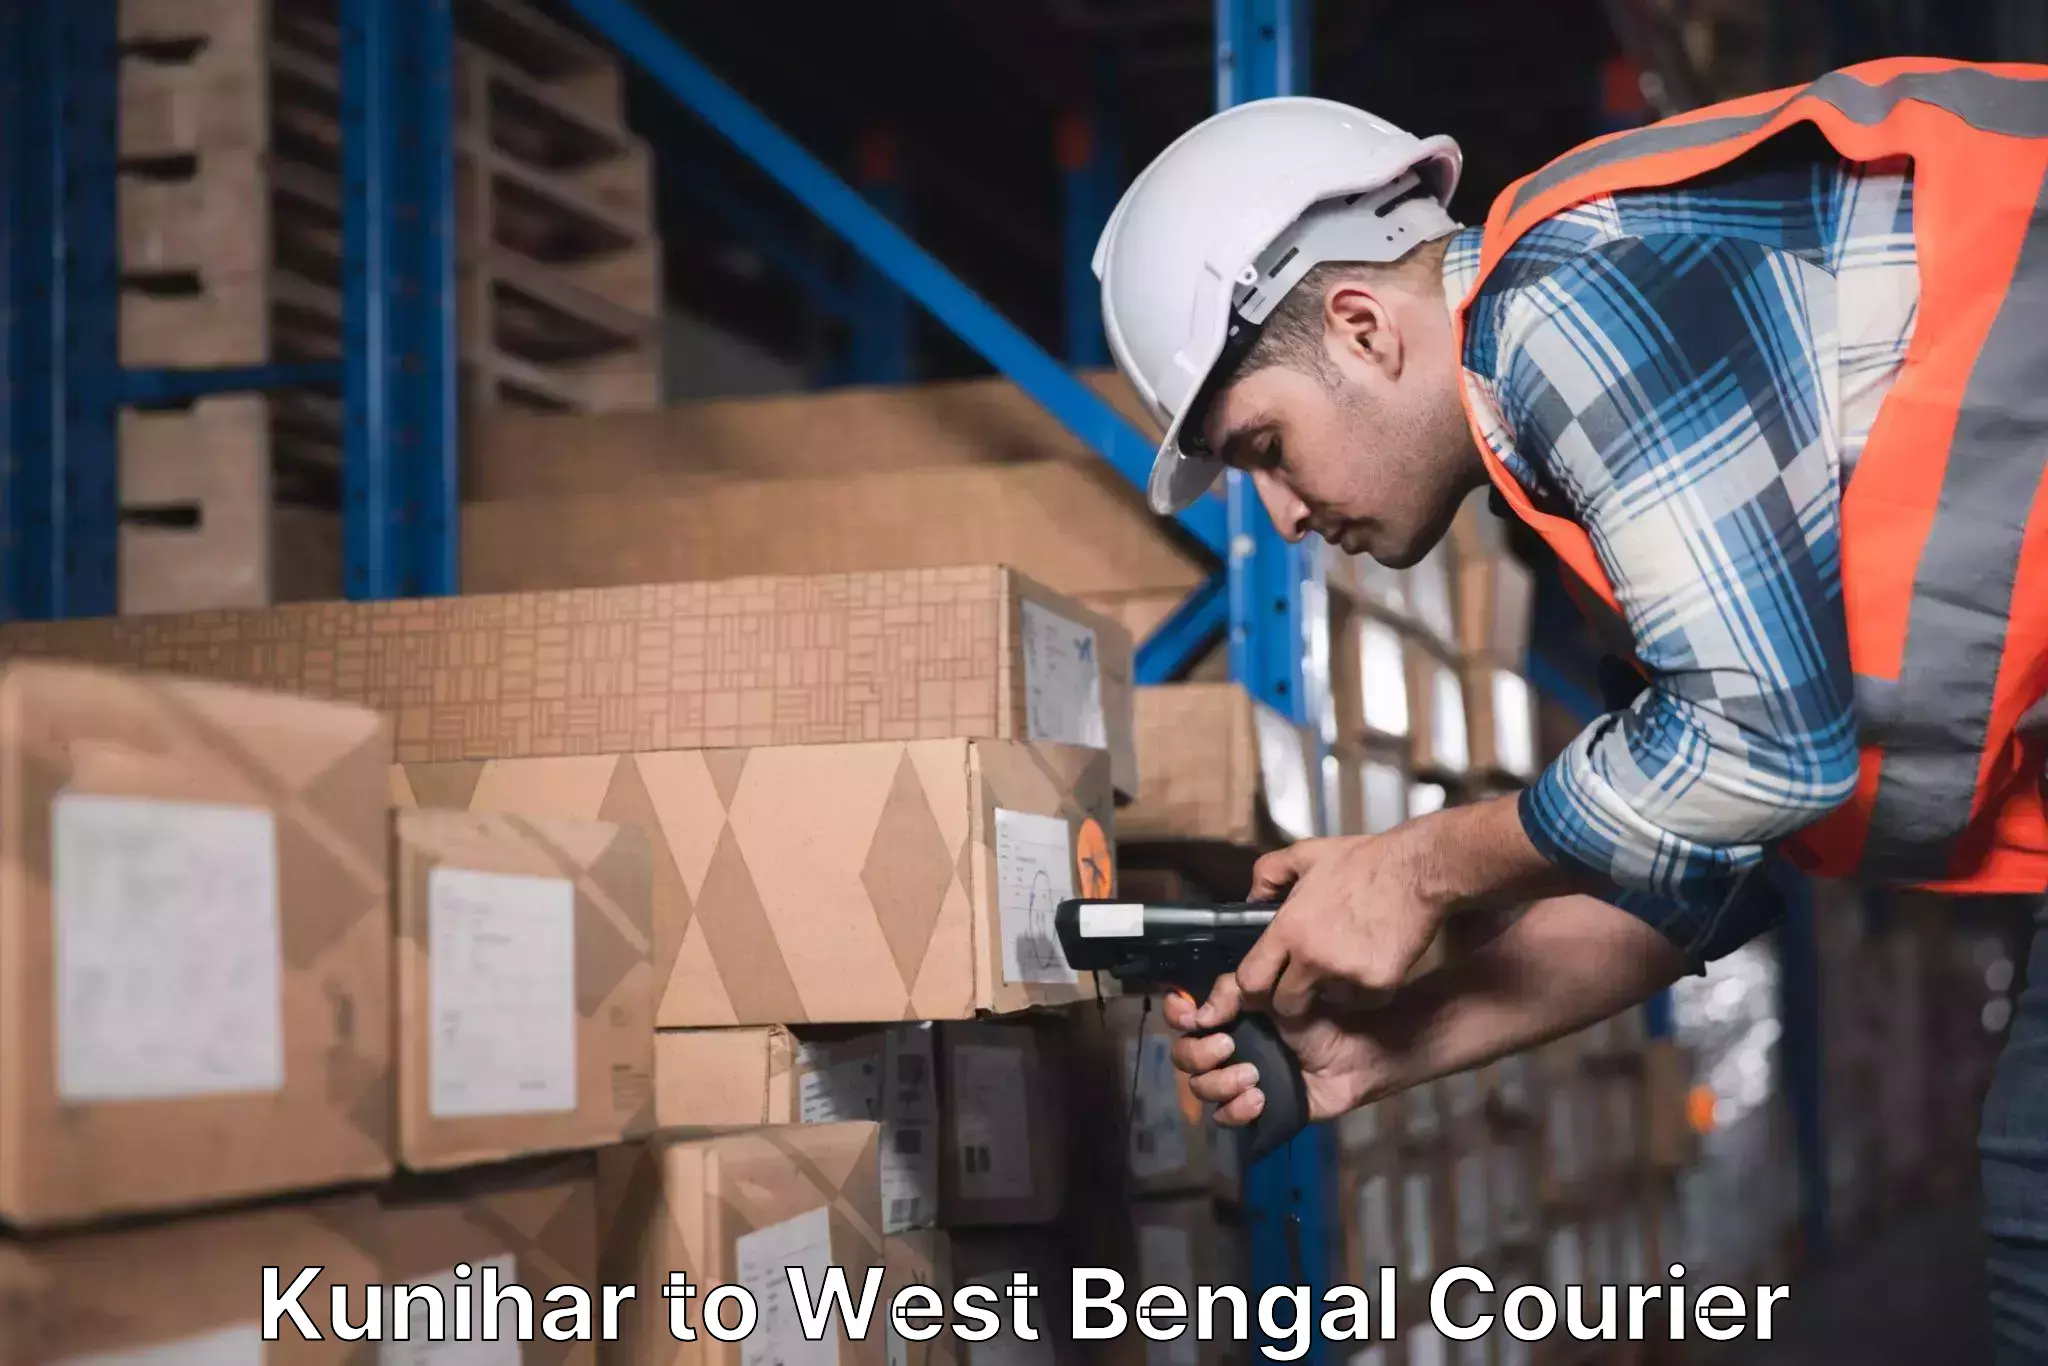 State-of-the-art courier technology Kunihar to Haldia port